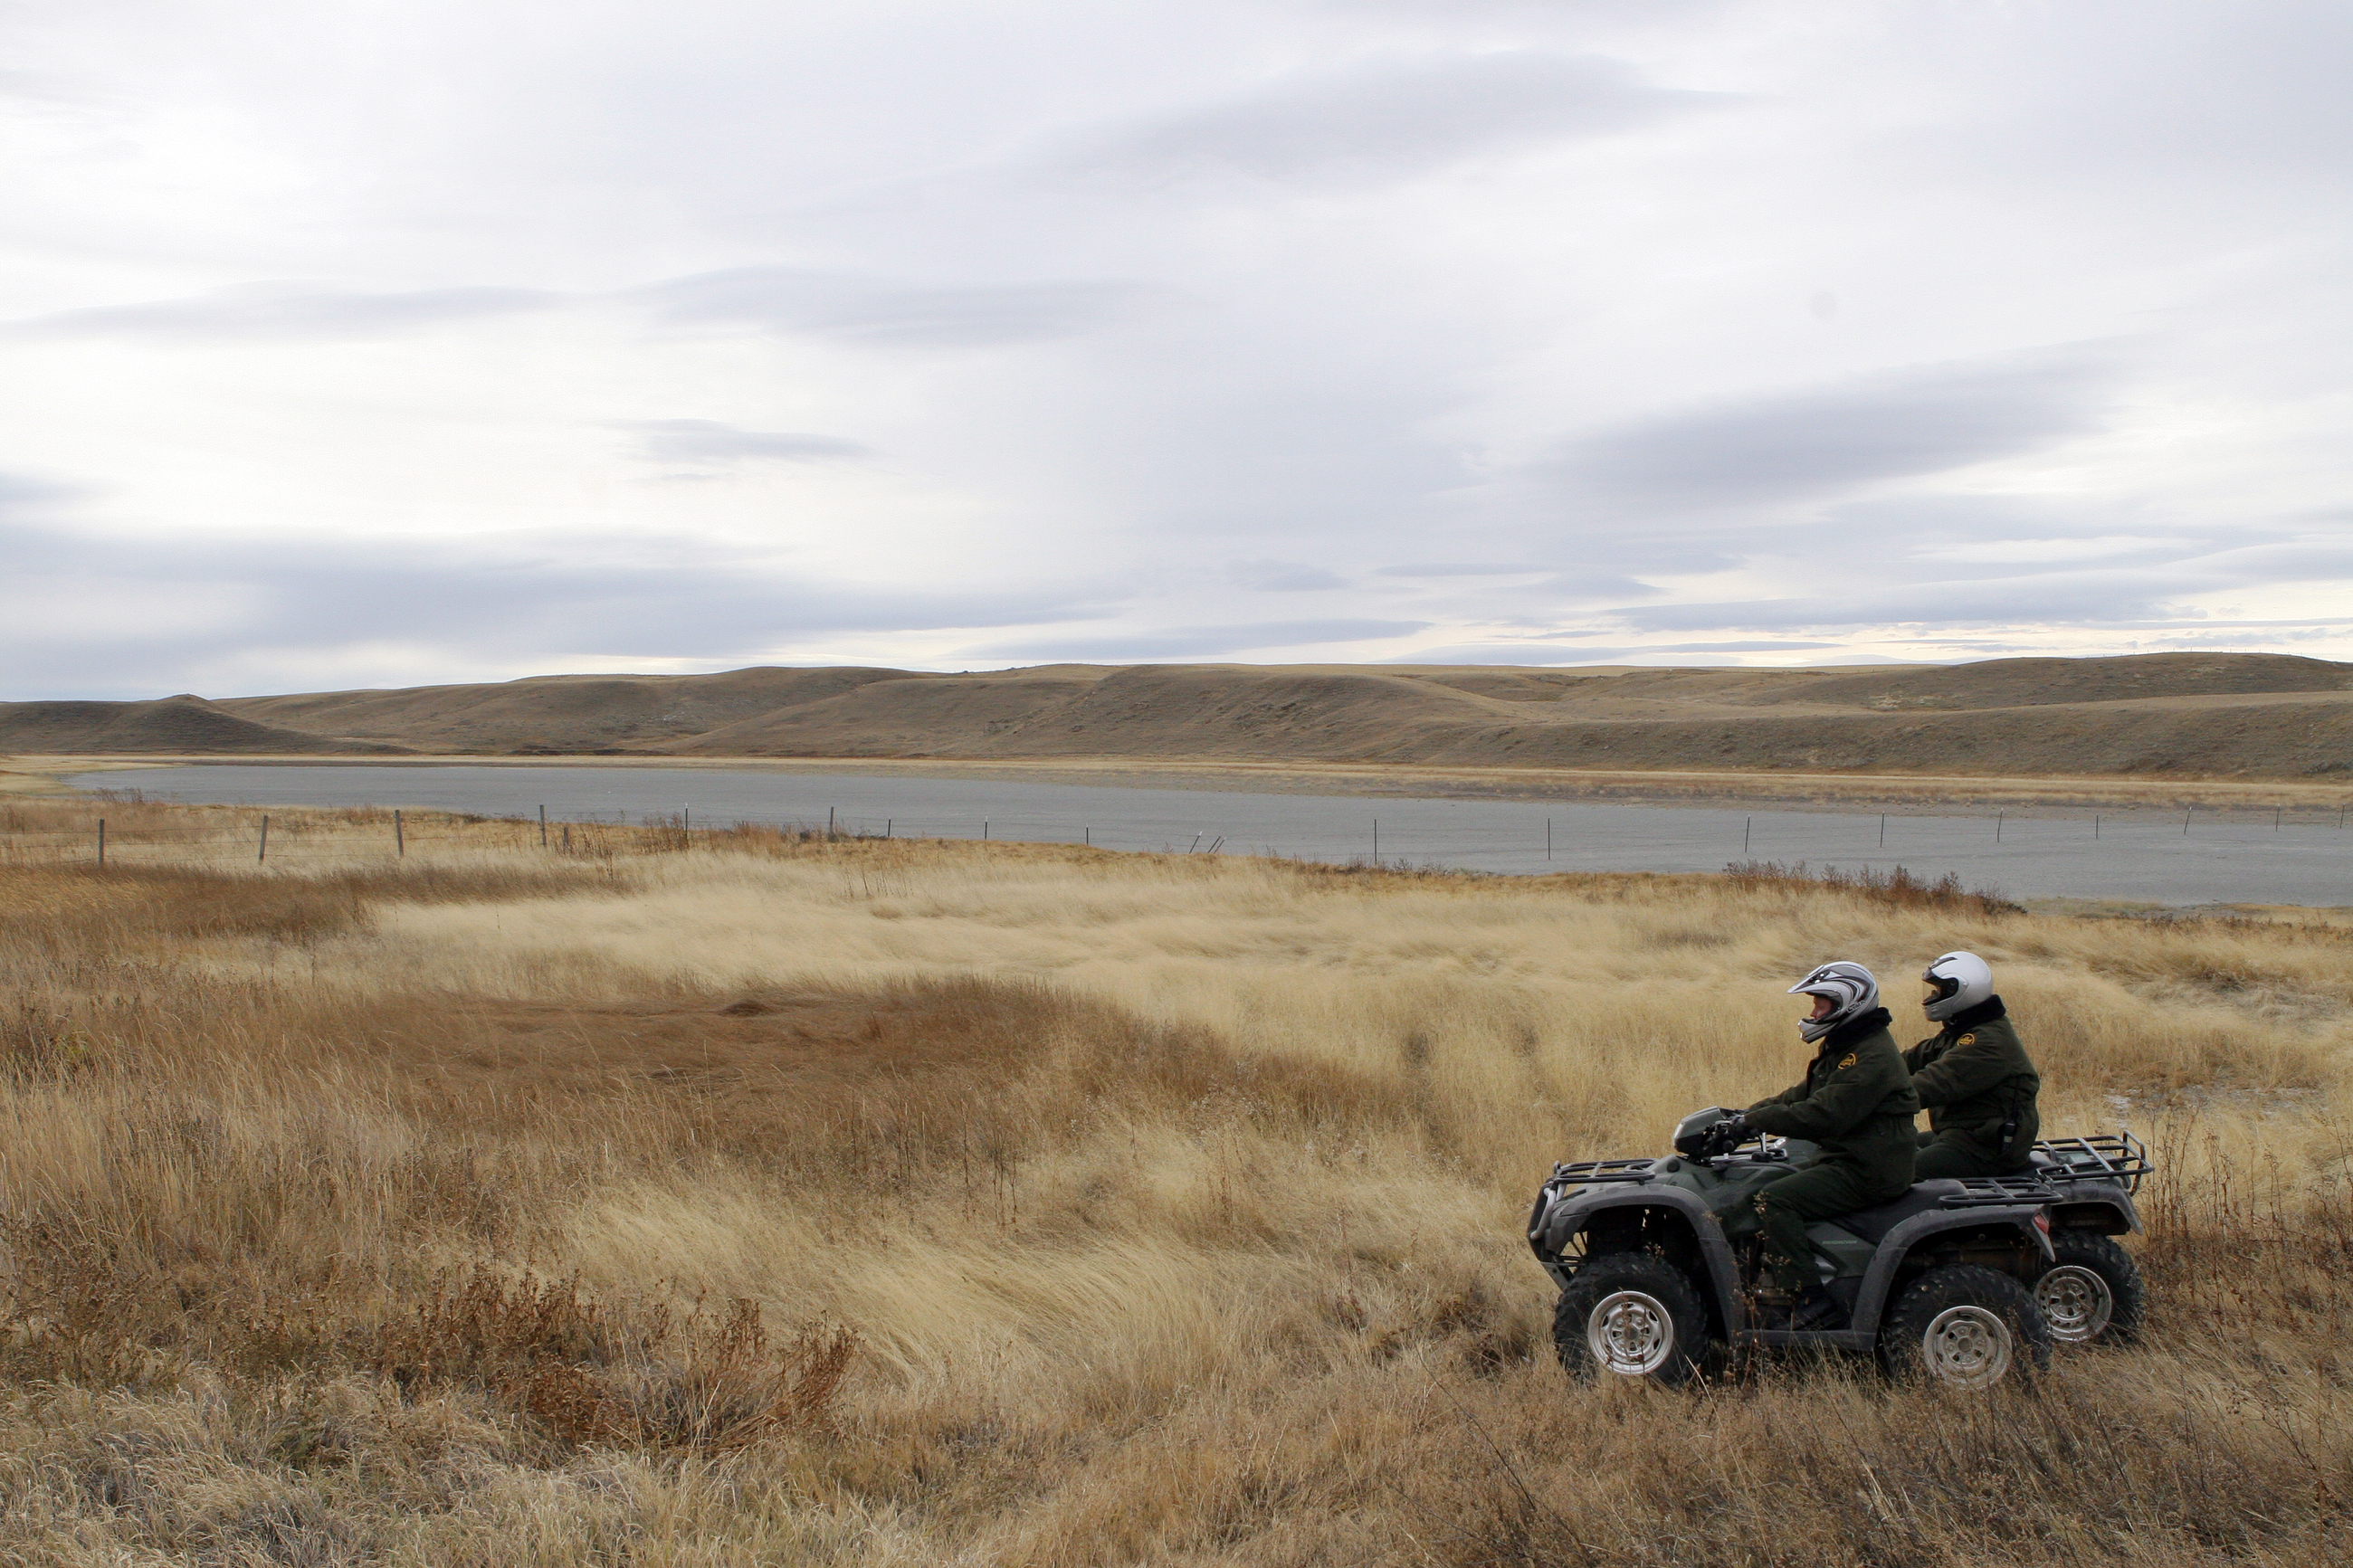 U.S. Border Patrol agents stationed near Sweet Grass Montana conduct patrols on there All Terrain Vehicles.